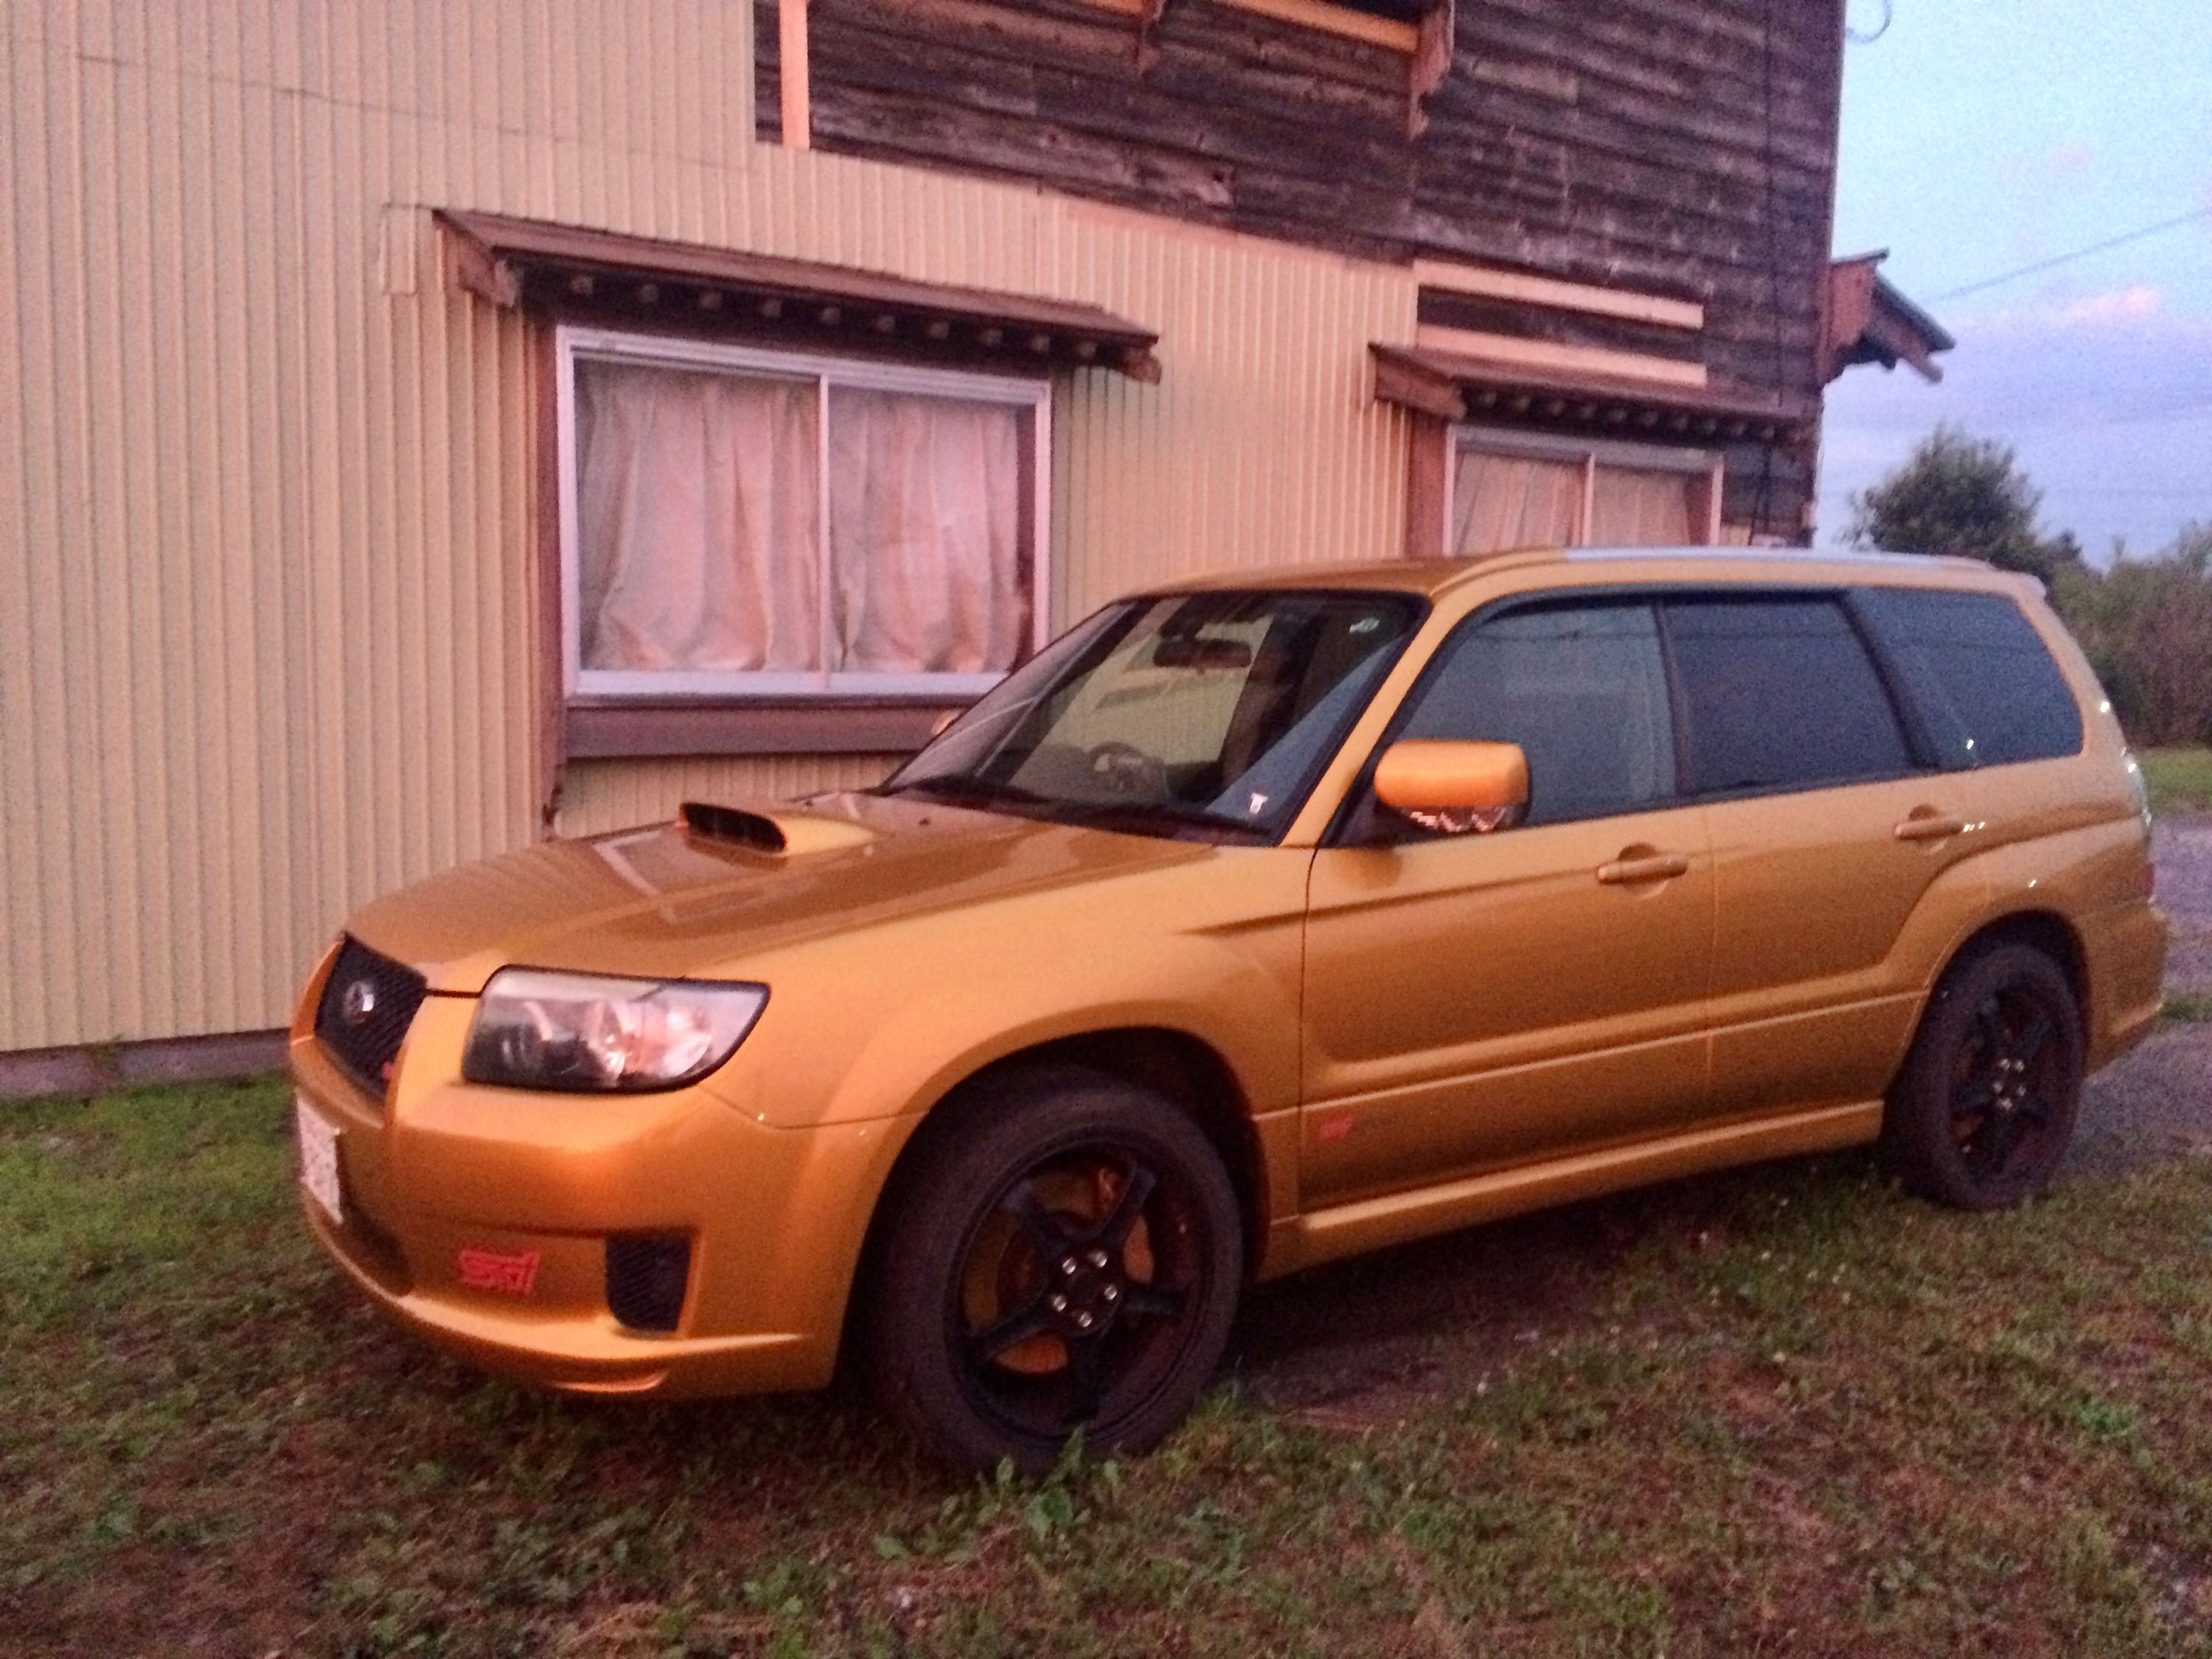 A metallic orange Subaru made even more orange by the colors of the sunset.